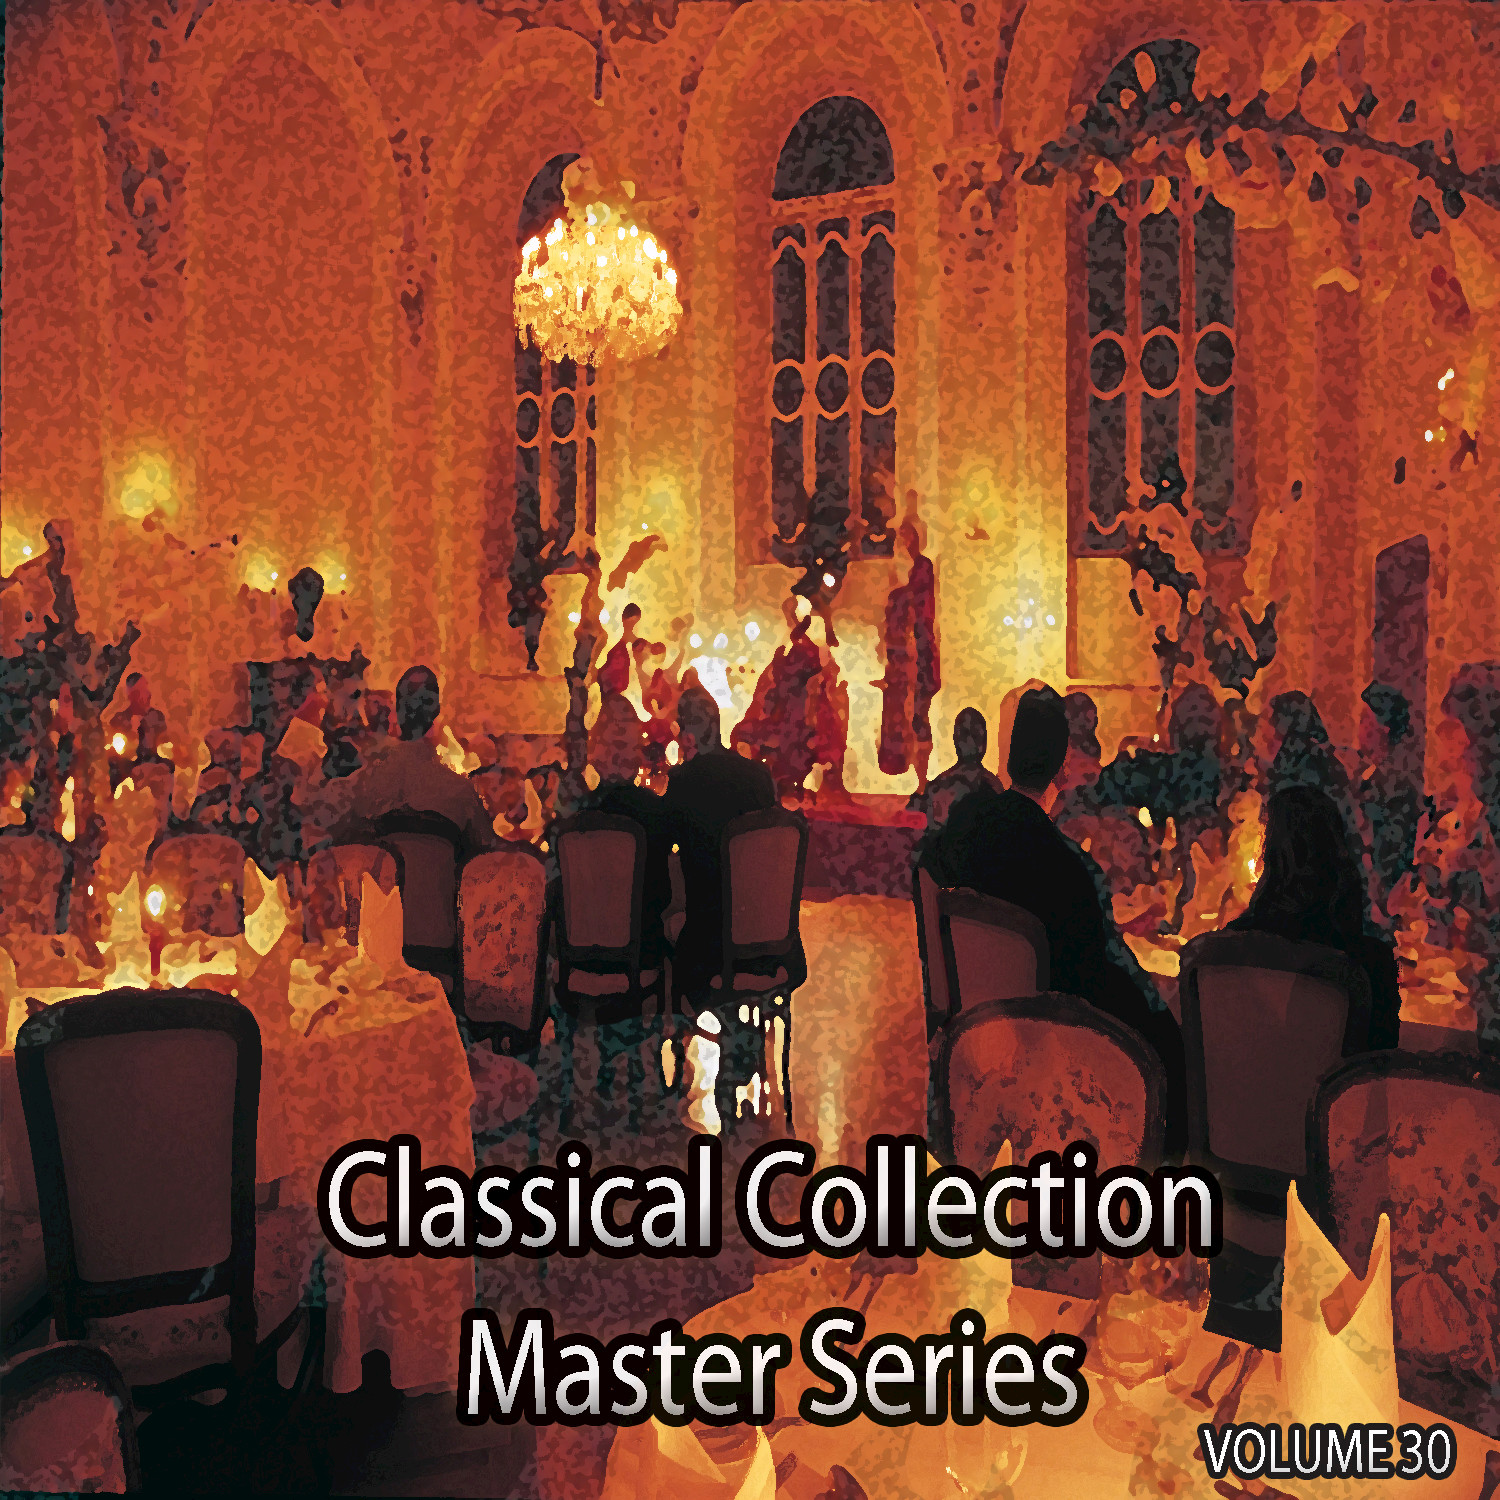 Concerto for Cello and Orchestra No. 1 in A Minor, Op.33: Pt. 1